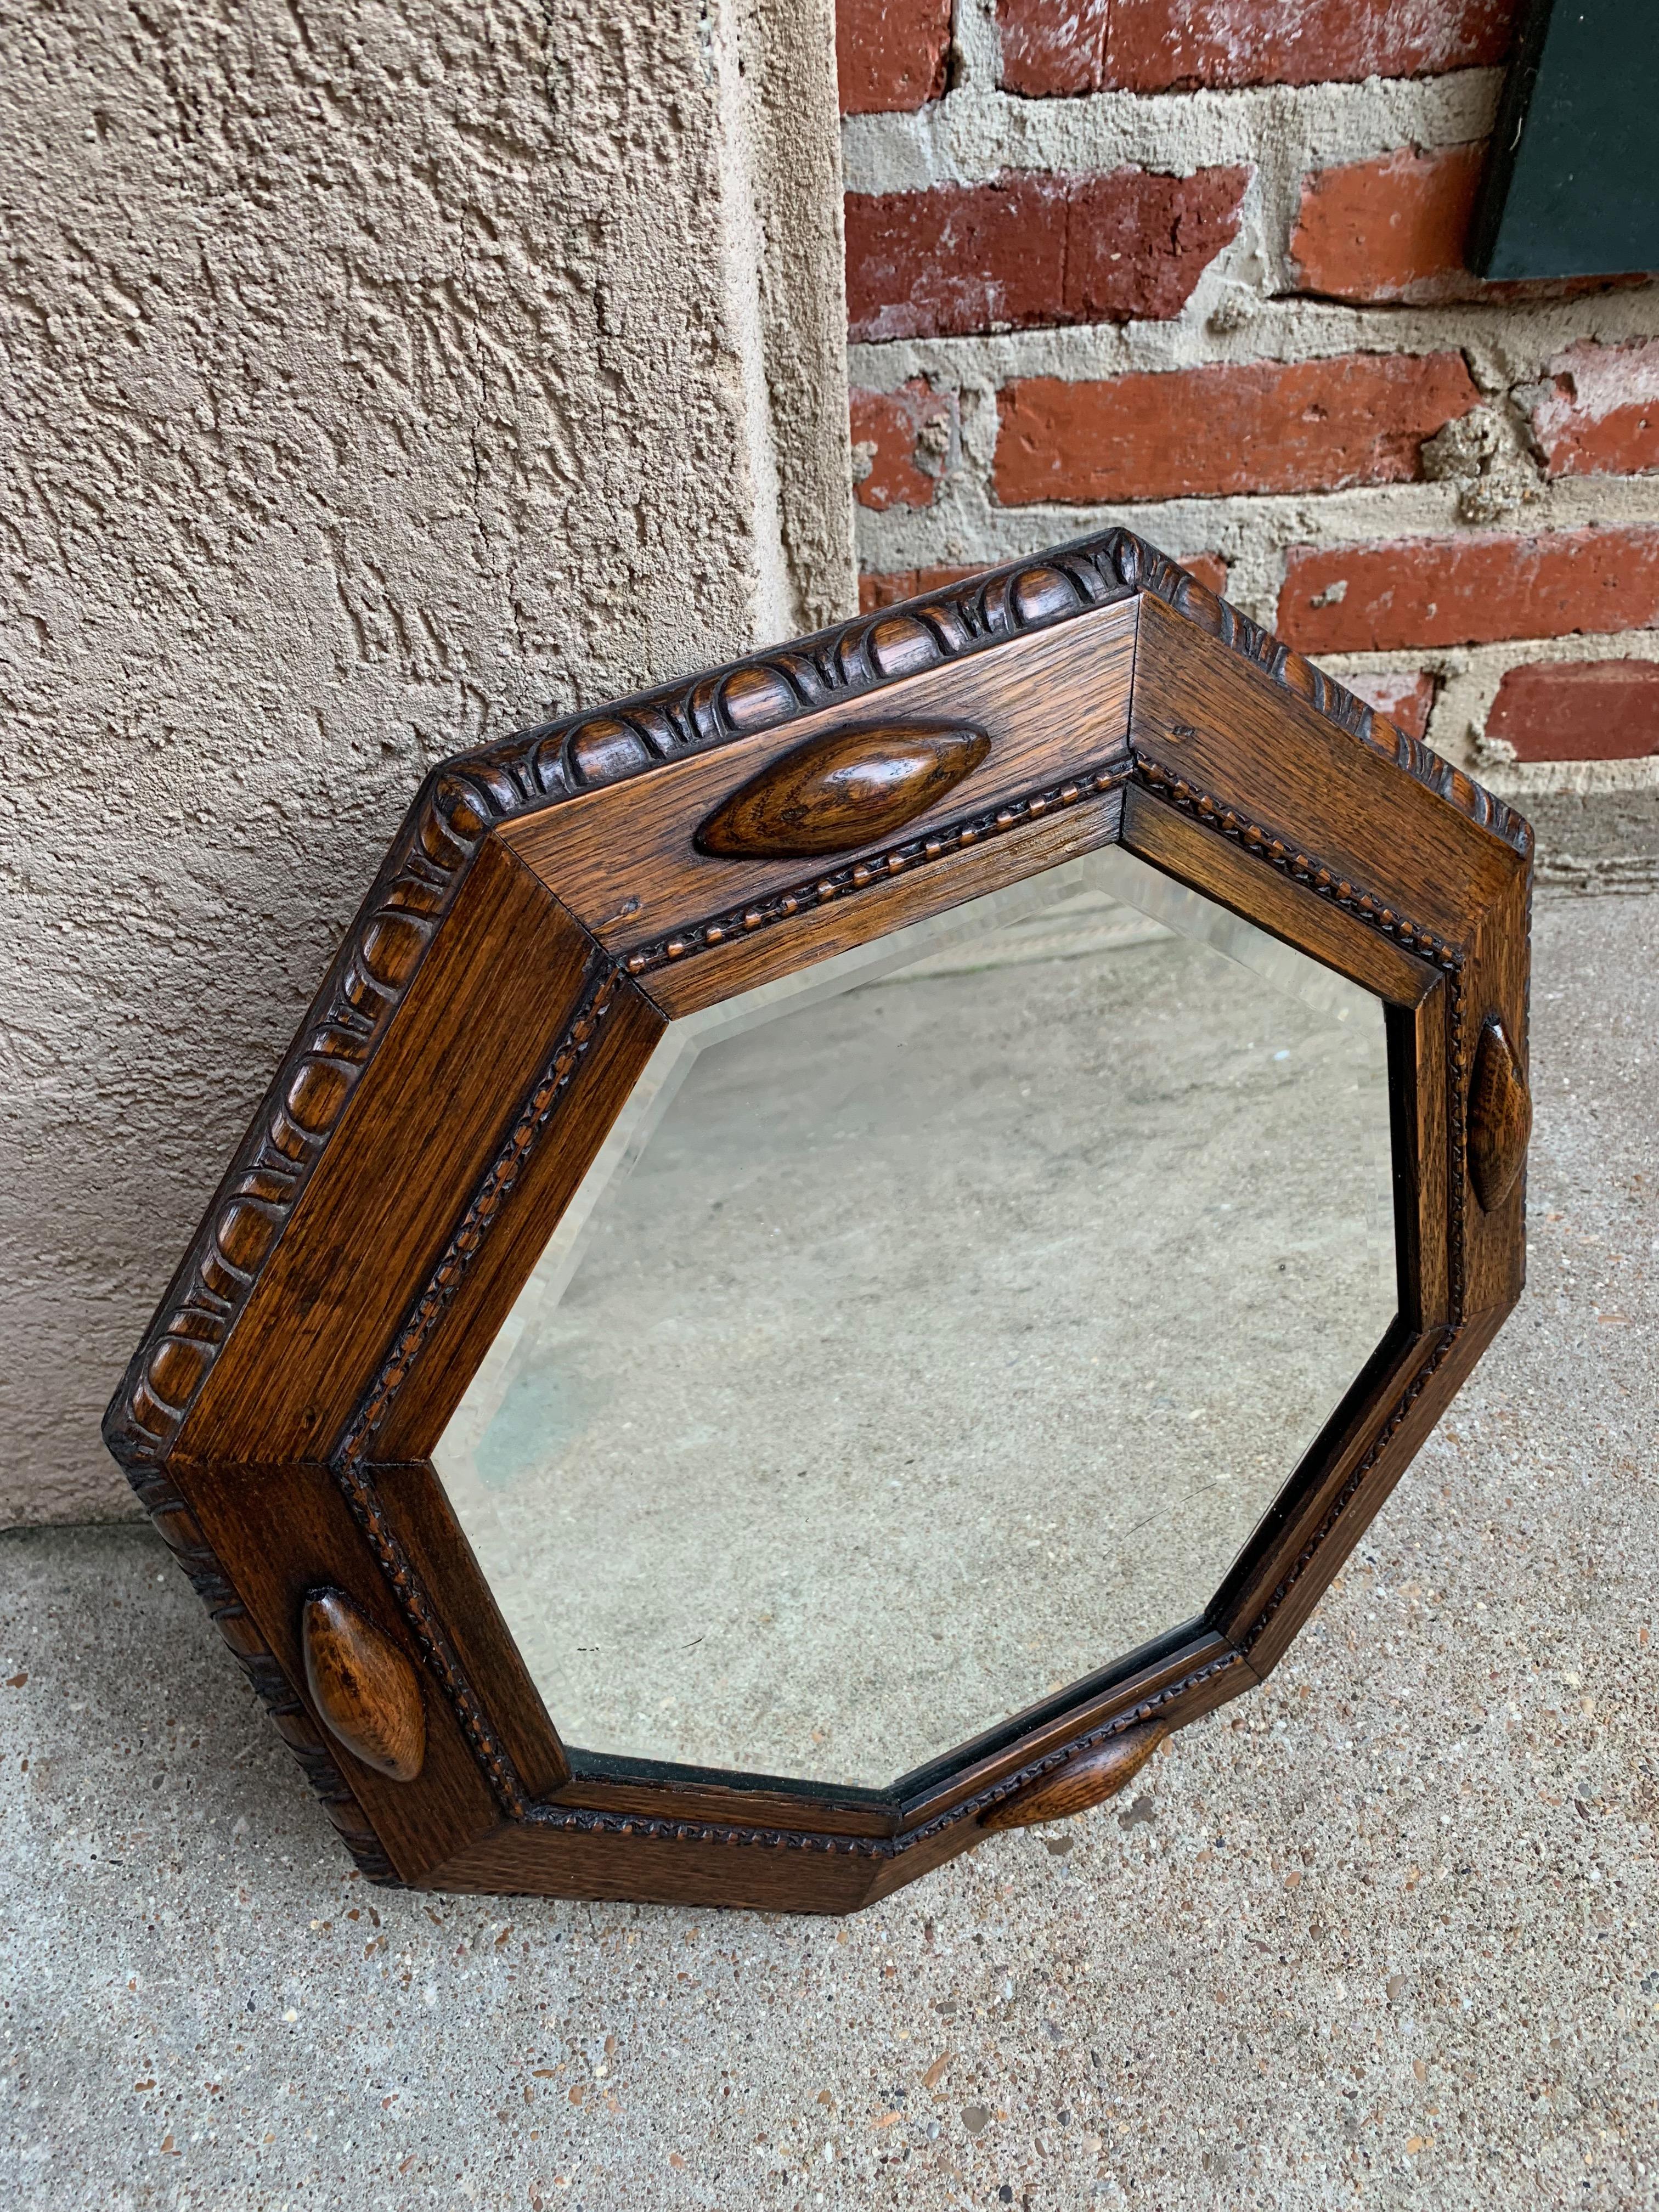 Direct from England, a lovely antique English oak frame wall mirror with a great octagon shape. Large carved beveled outer edge with raised carved trim detail inside and huge geometric applied trim on the compass points!
~ Wood frame is a somewhat